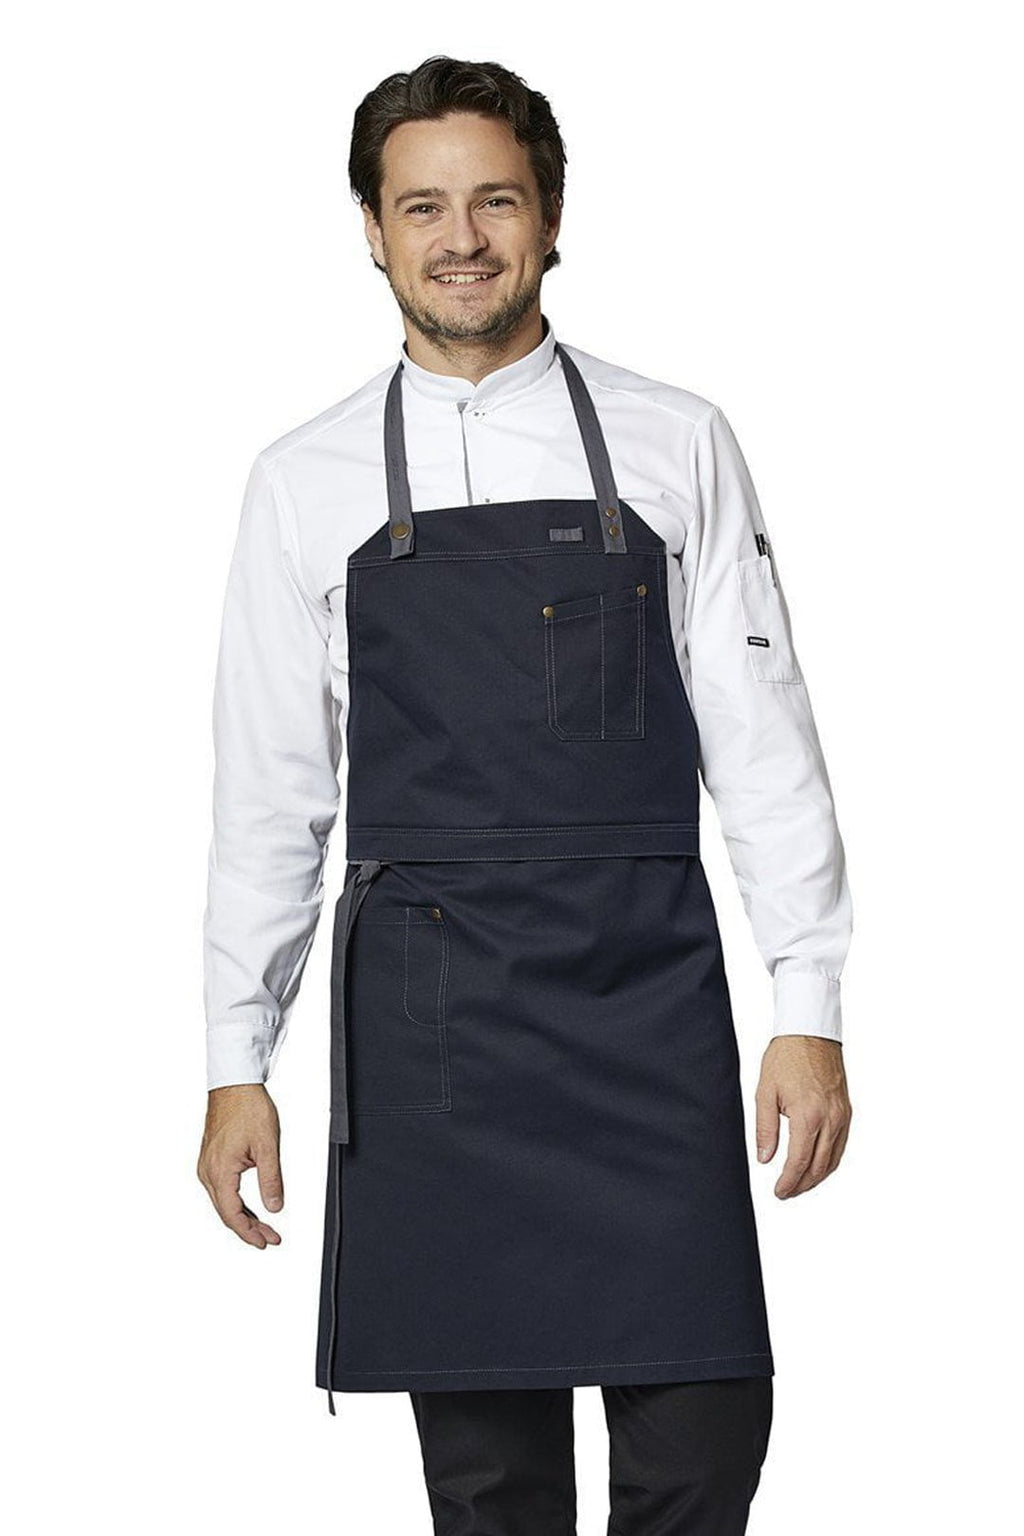 Workwear of Denmark, Uniforms for Food & Care